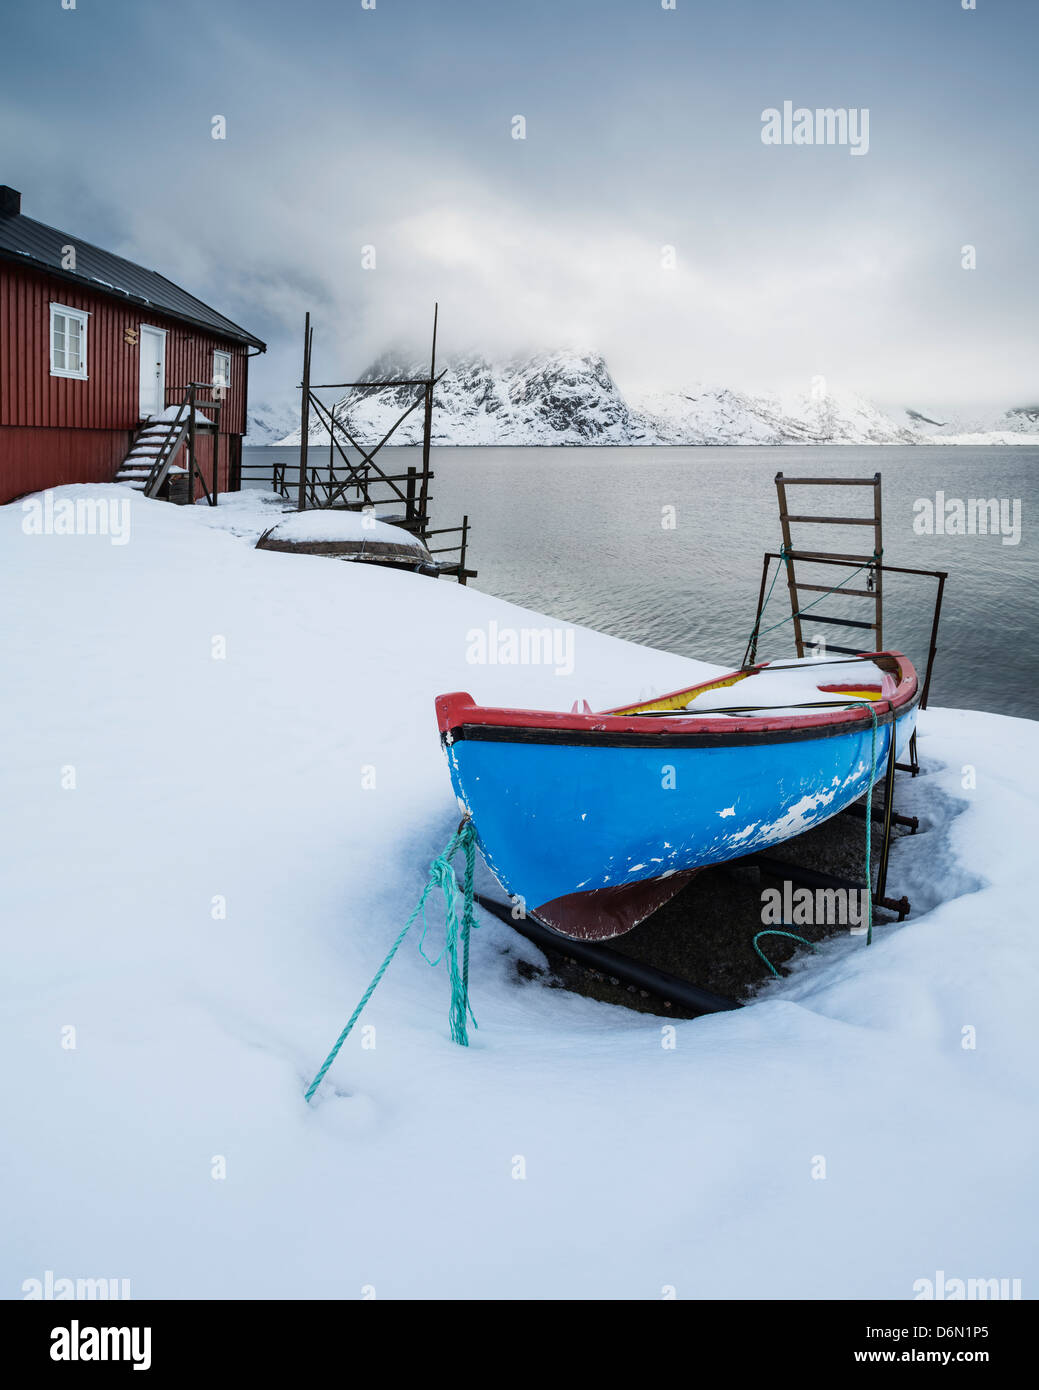 Small row boat surrounded by snow outside traditional Rorbu cabin, Toppøya, Moskenesøy, Lofoten Islands, Norway Stock Photo